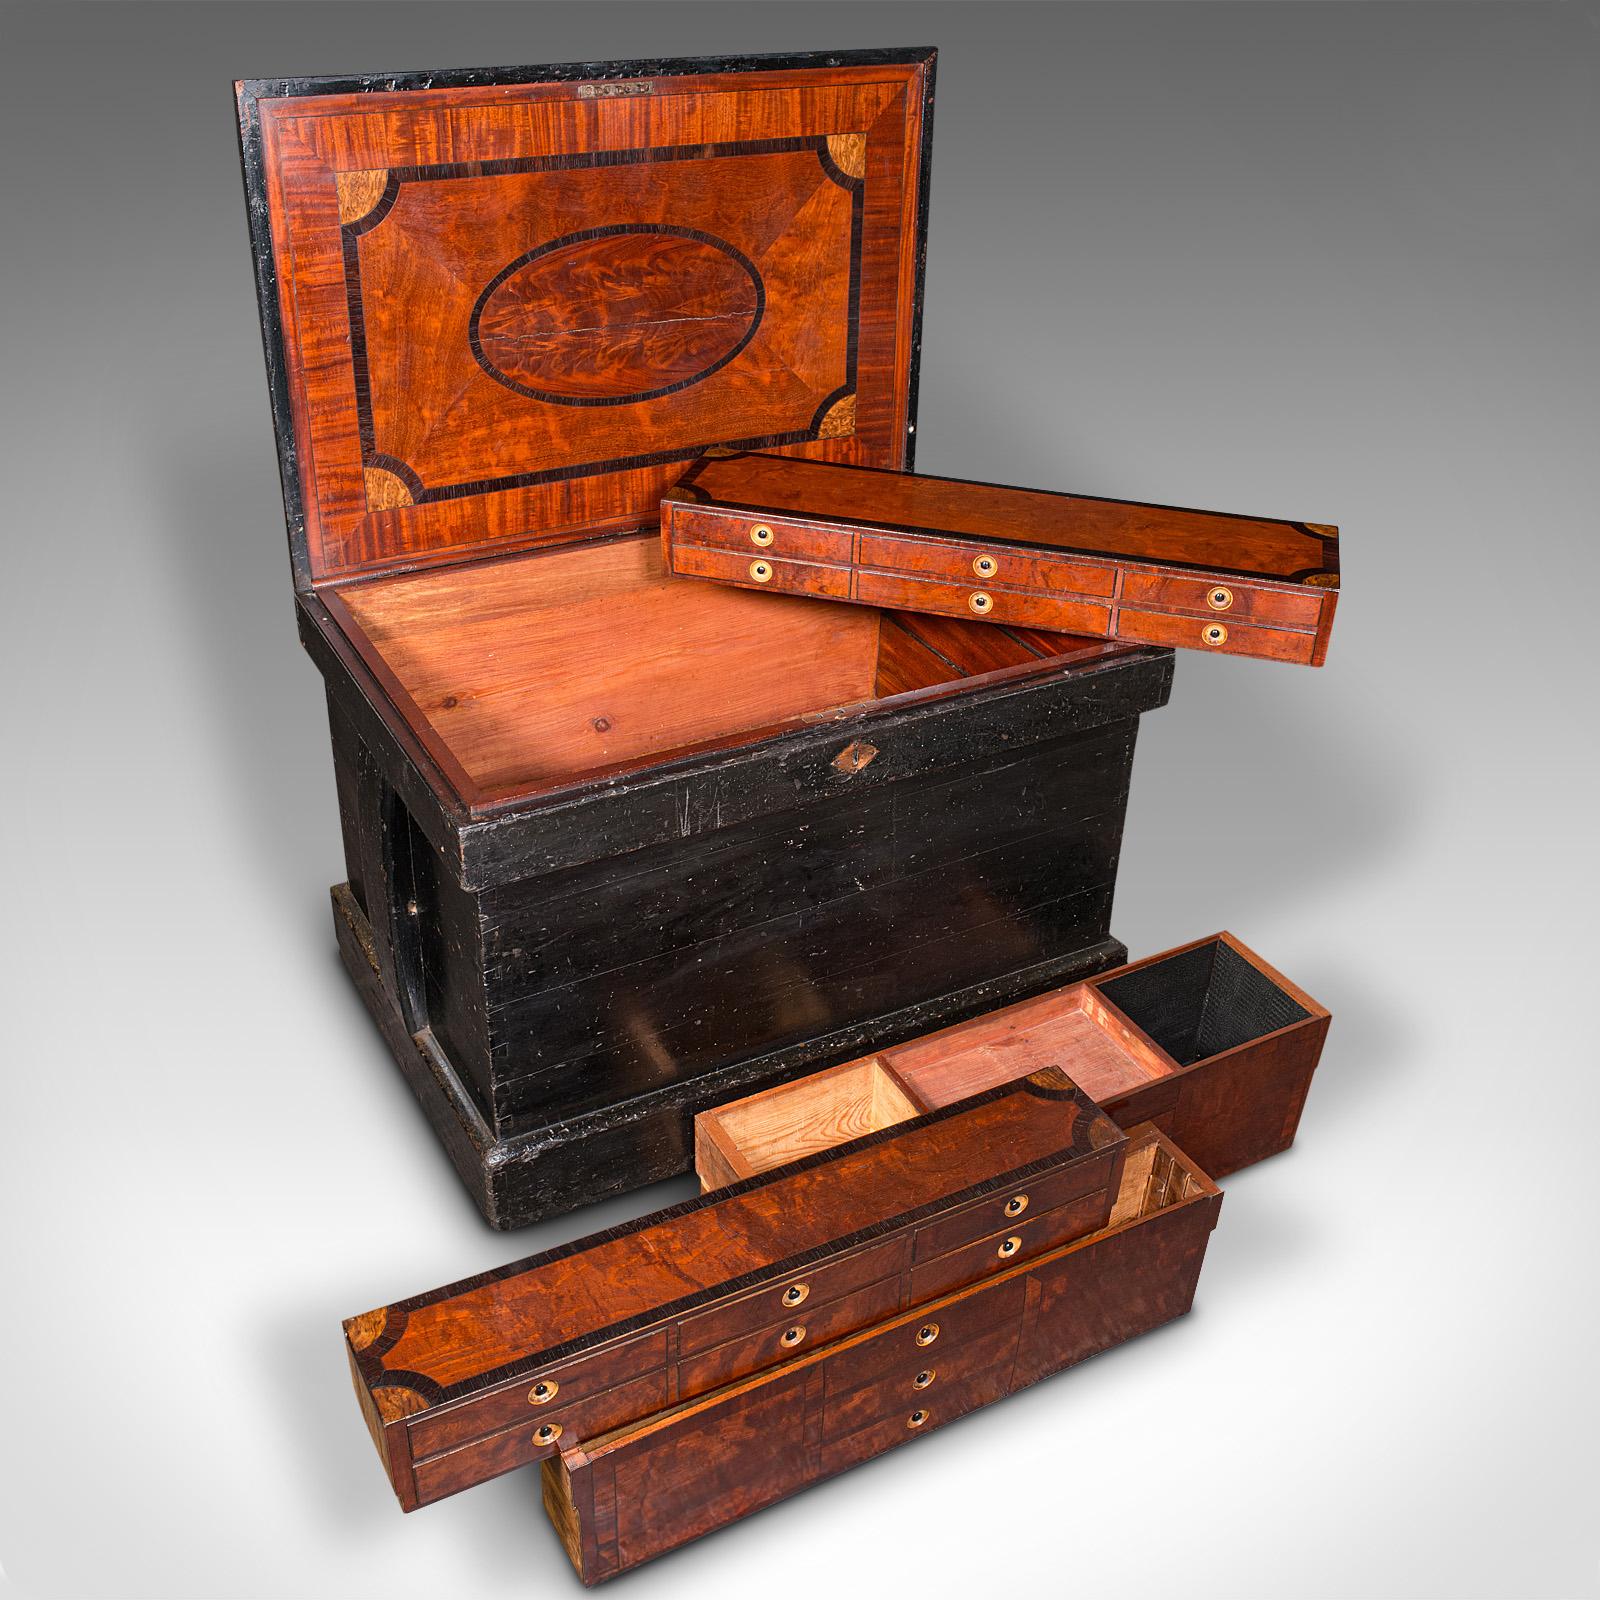 This is an antique master cabinet maker's chest. An English, heavy tool trunk with mahogany and walnut interior, dating to the early Victorian period, circa 1850.

Wonderful master craftsman's tool chest with an exquisite fitted interior
Displays a